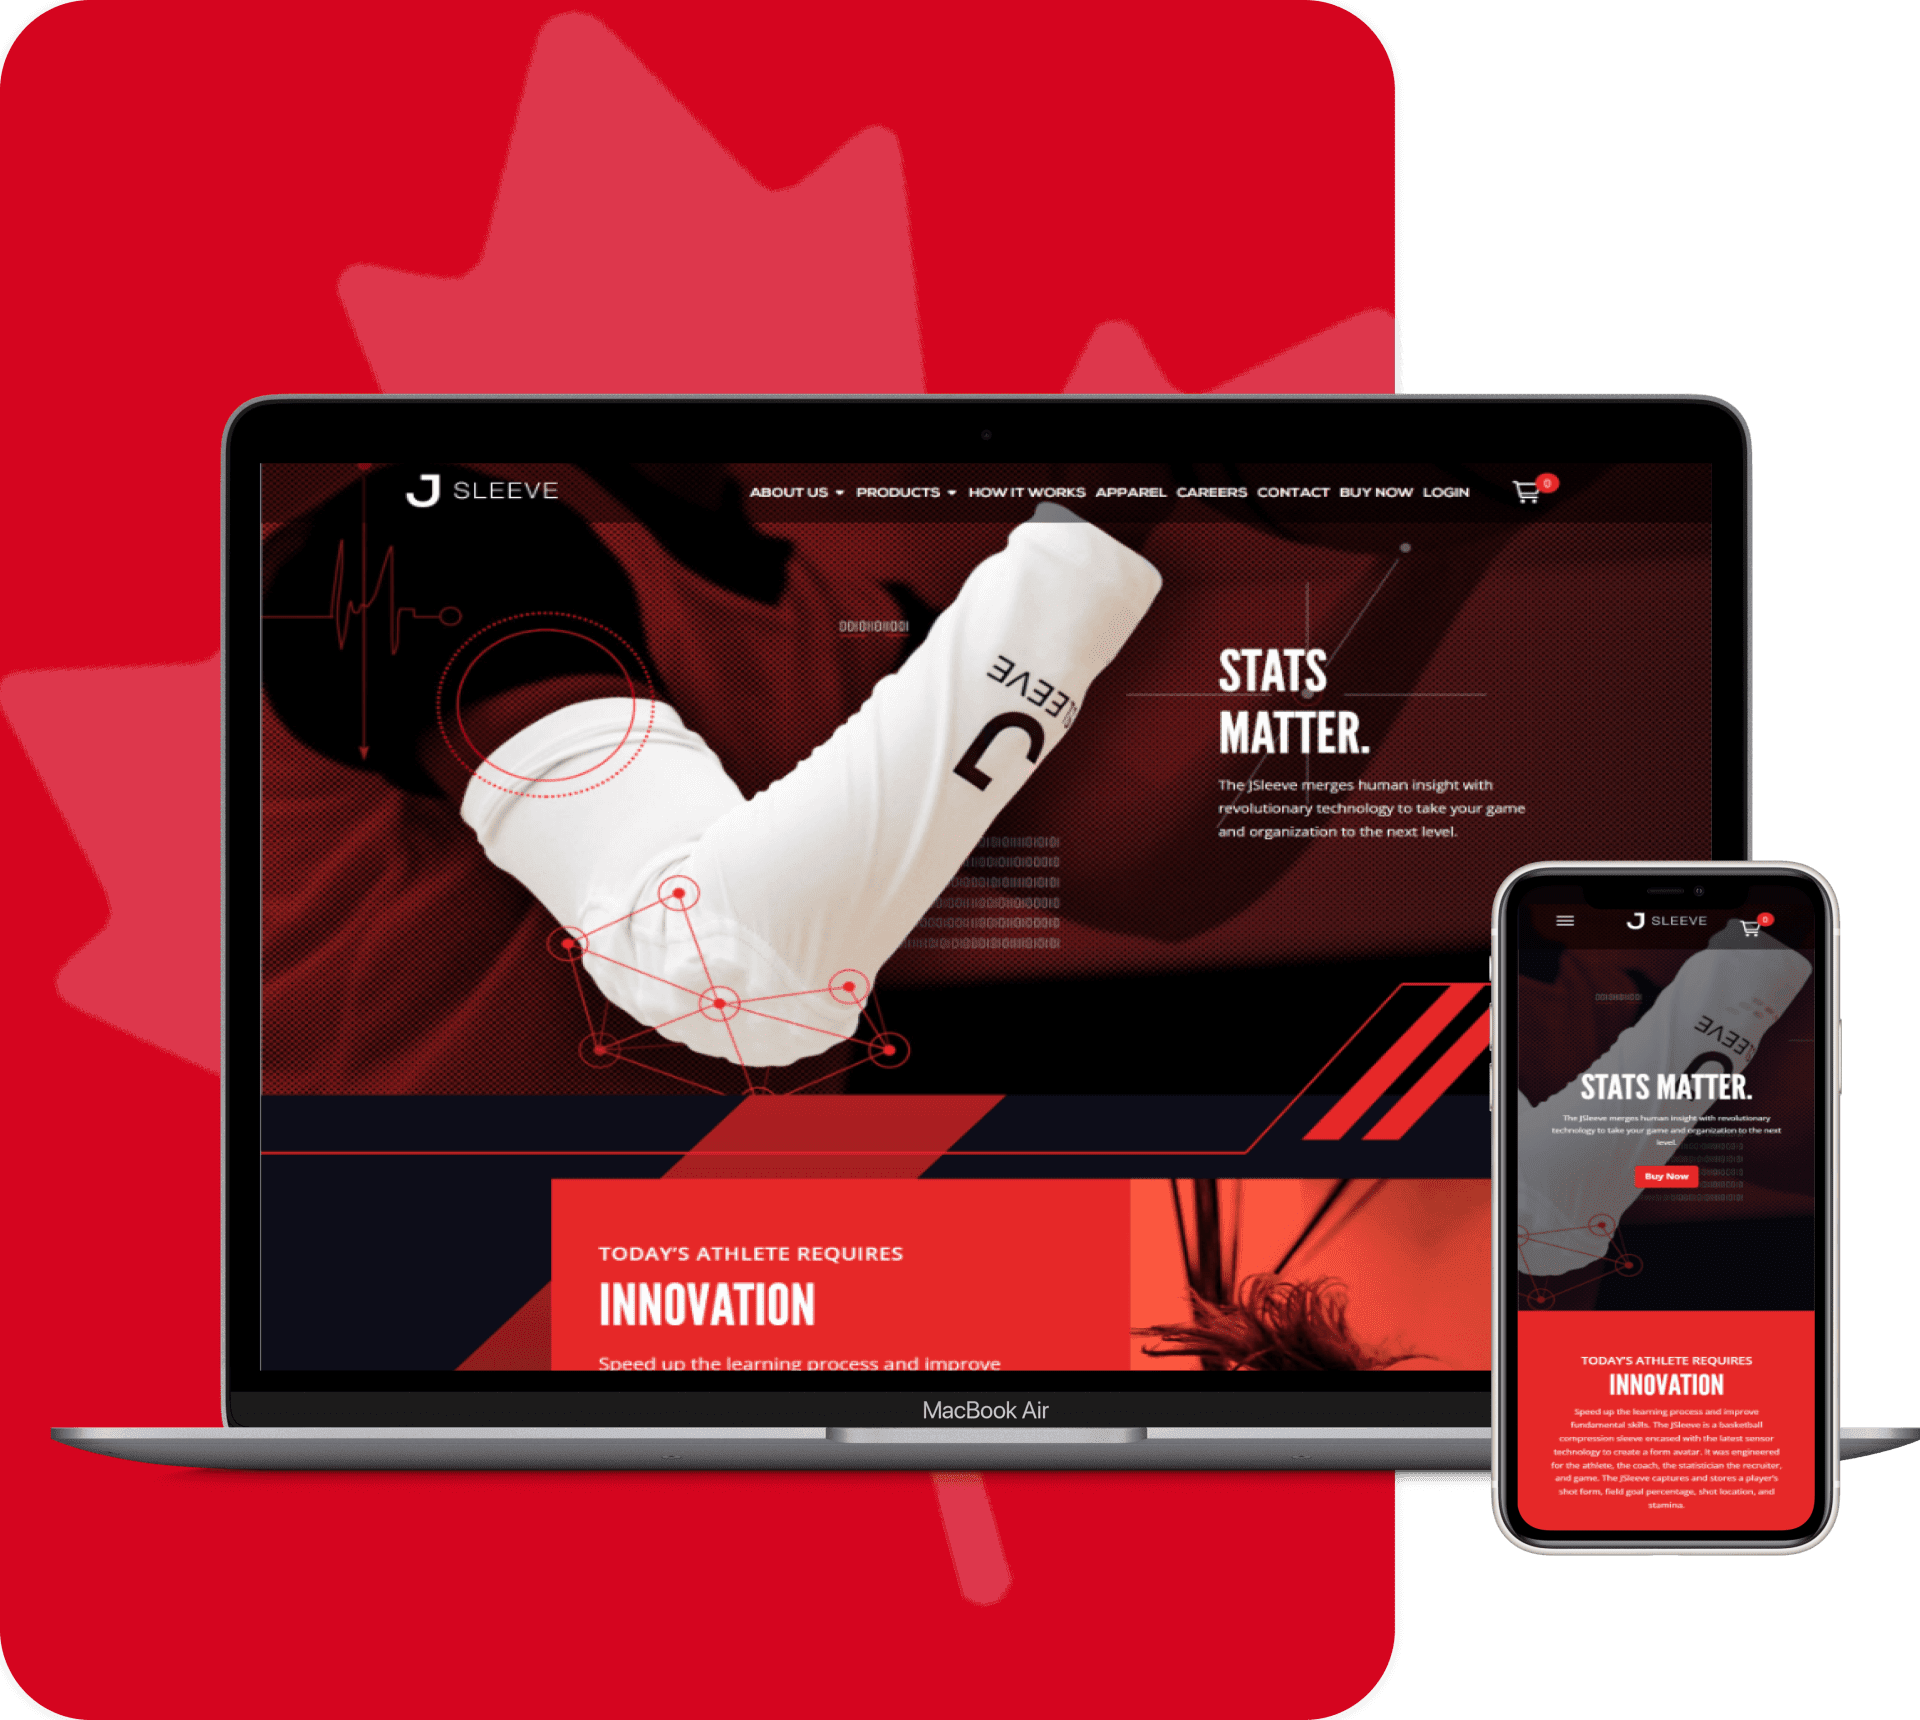 SLEEVE Project done by Canadian Software Agency